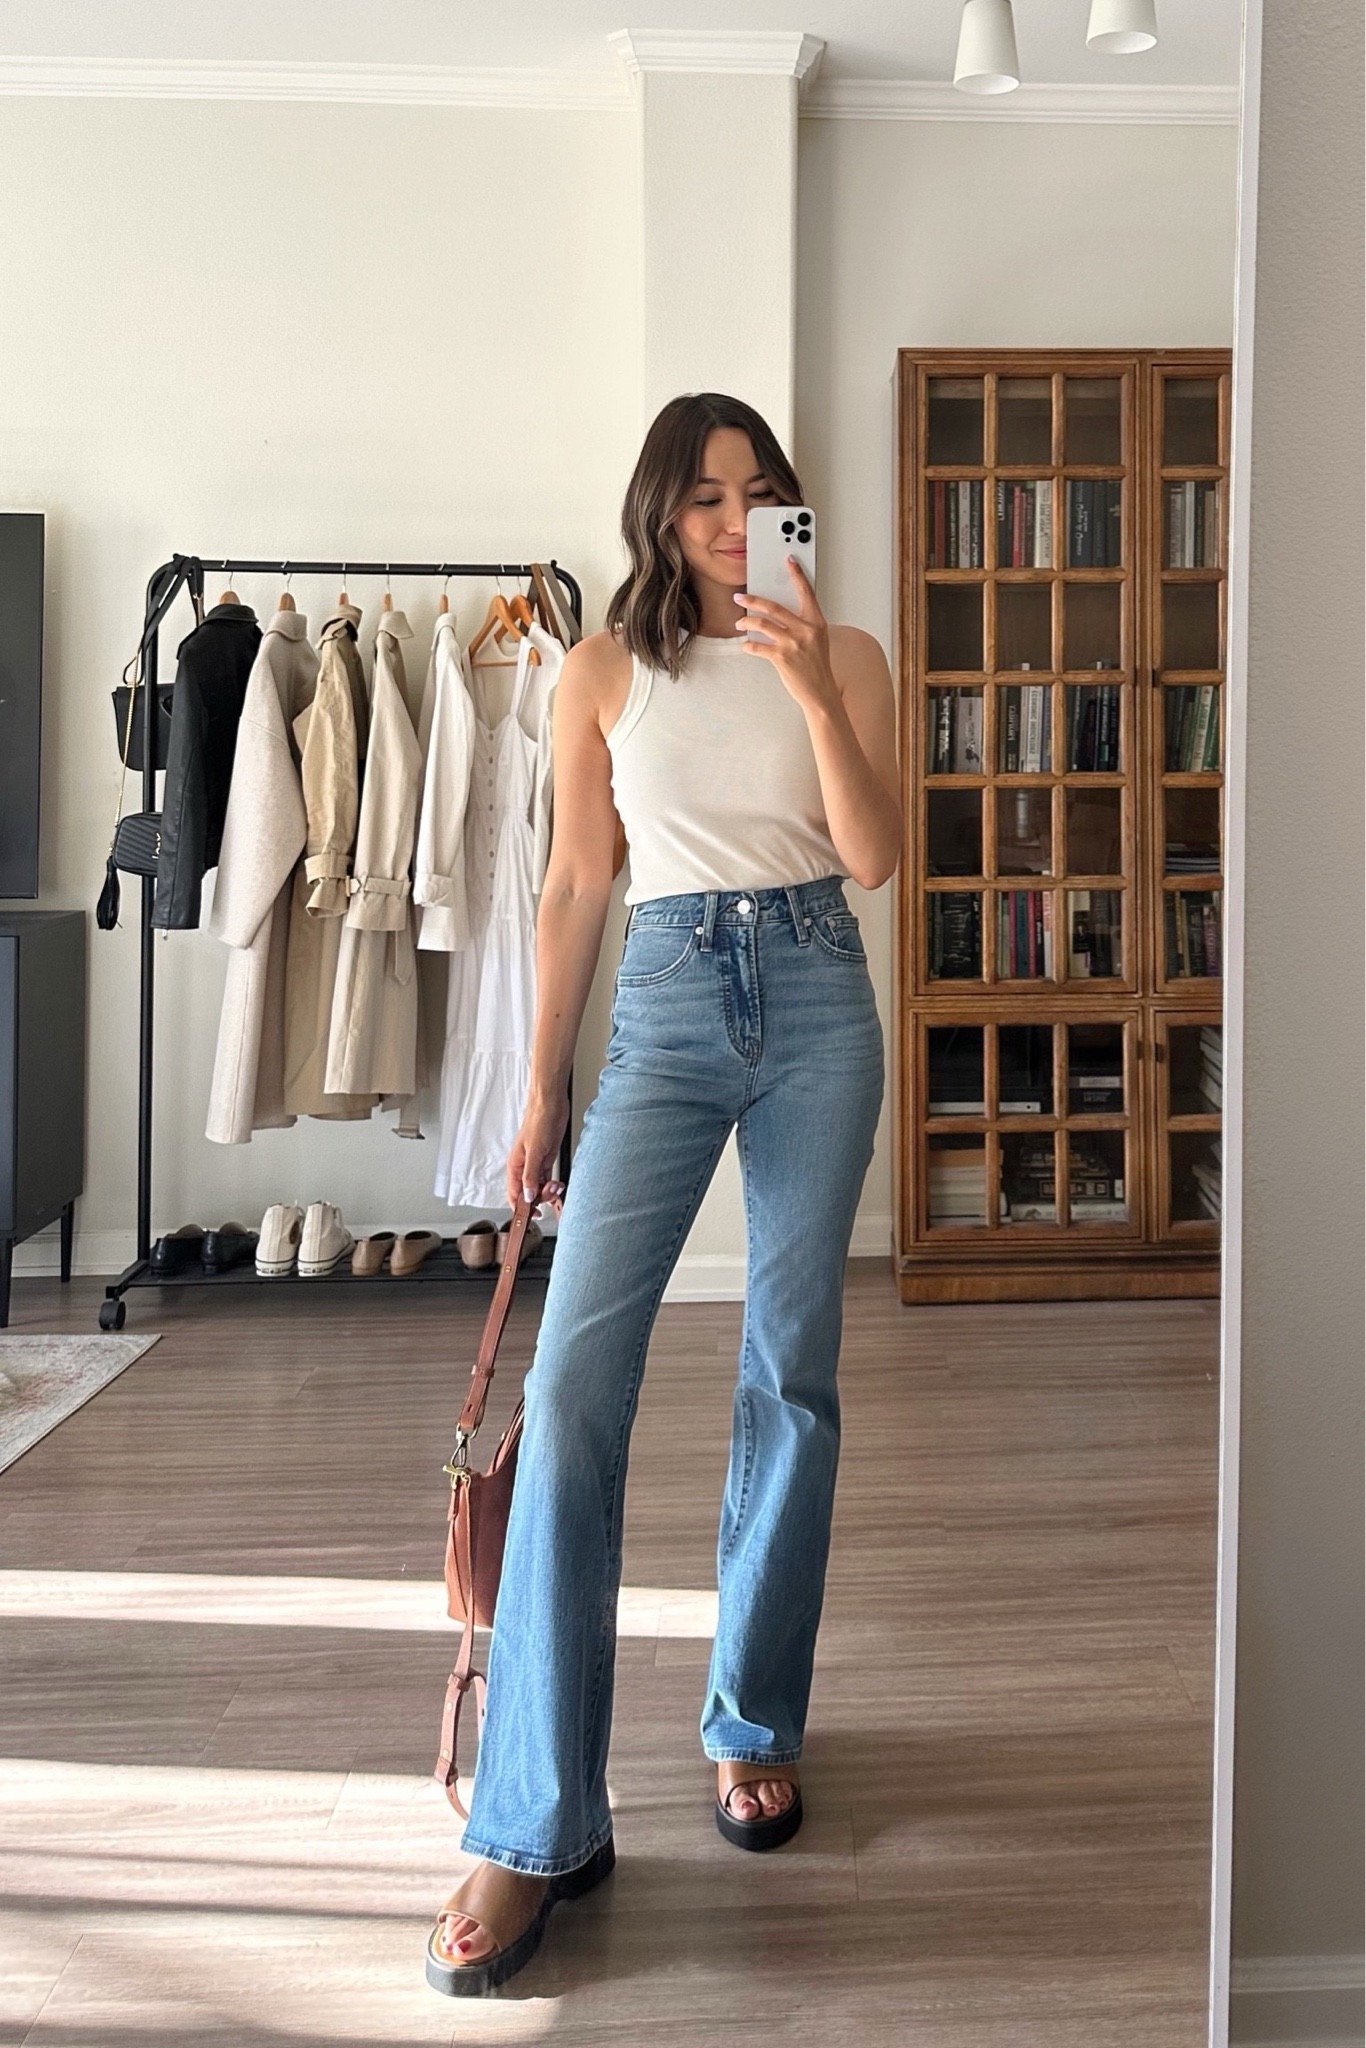 How to Mix Flare Jeans with our Vintage Items